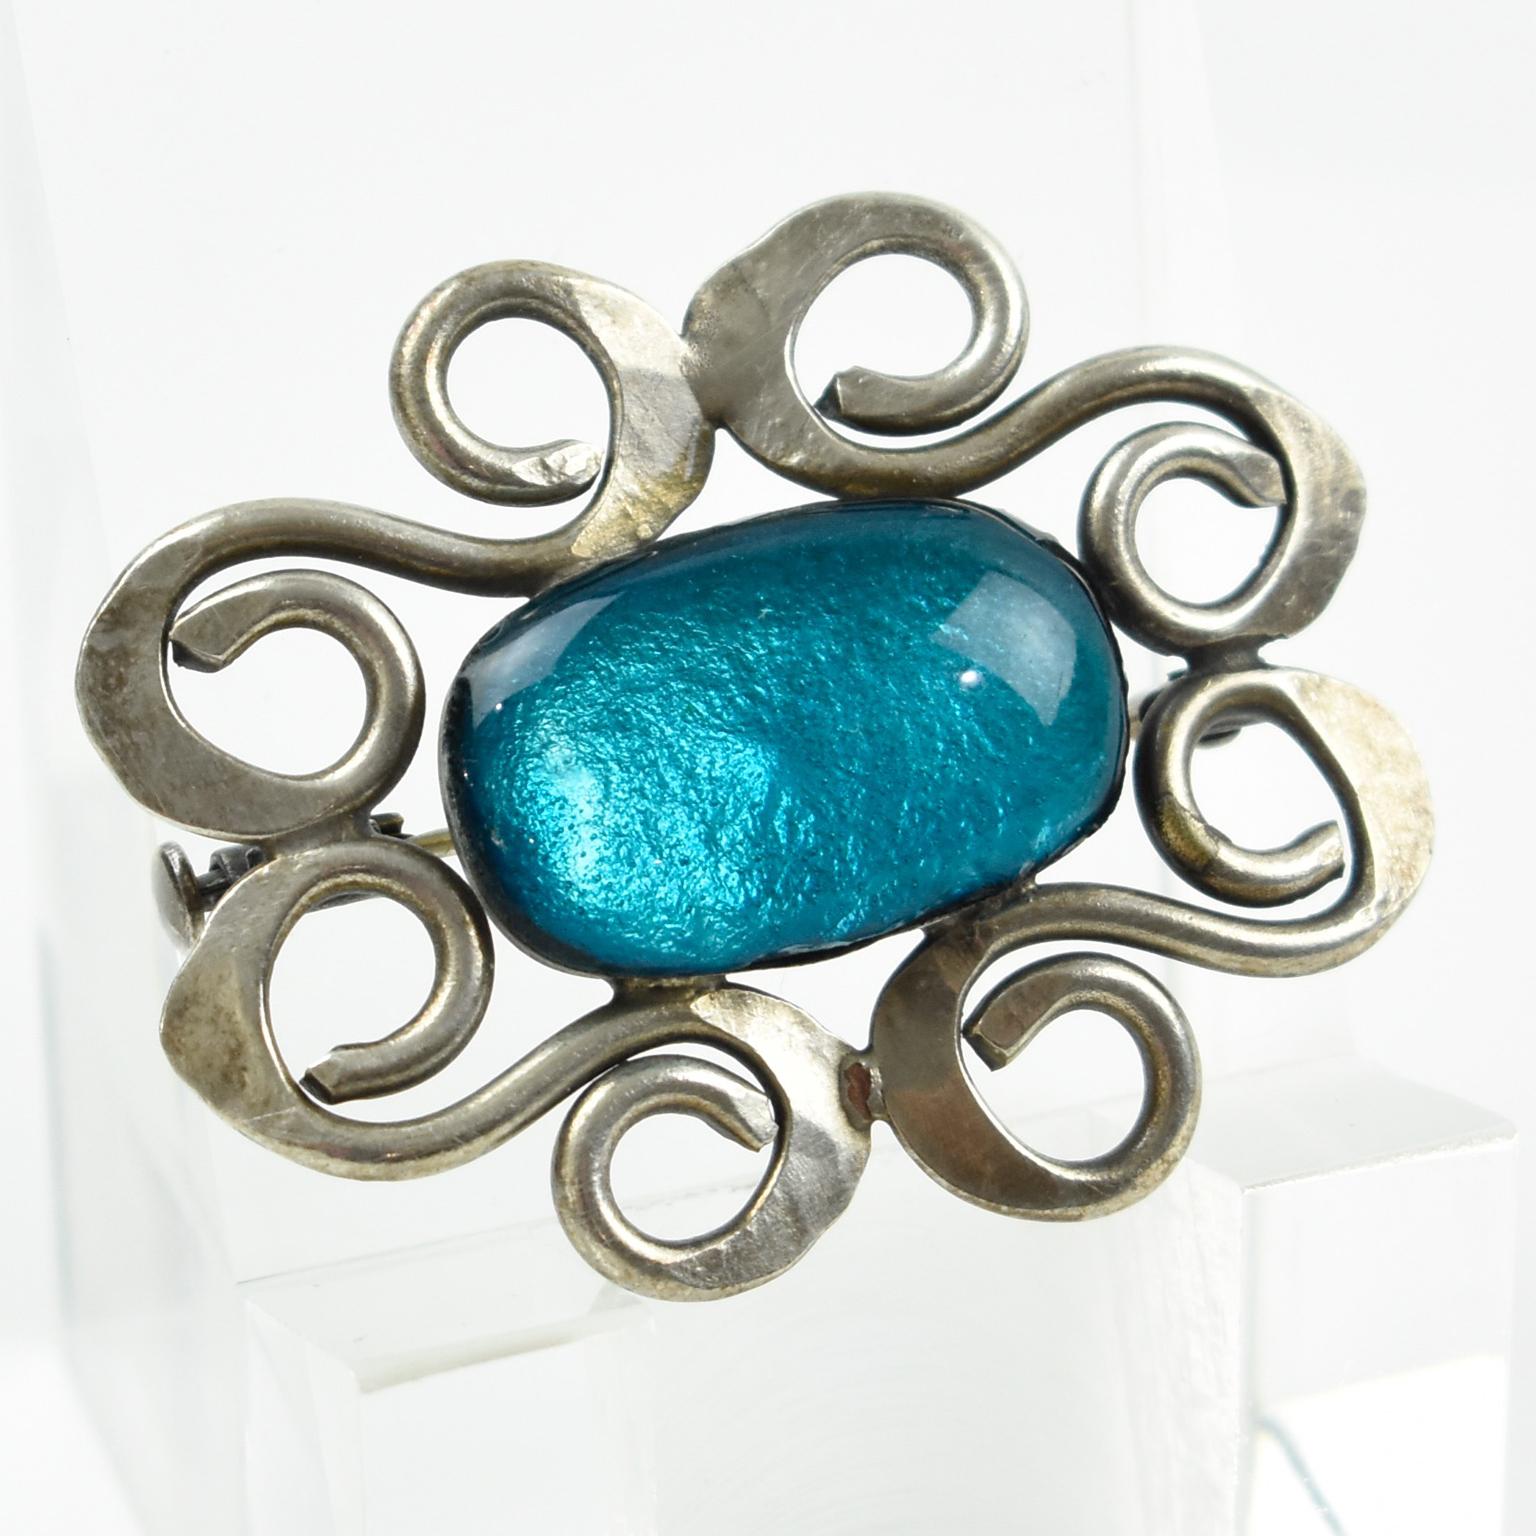 This lovely Mid-Century Modern pin brooch was crafted in France in the 1960s. The geometric design boasts a floral-inspired shape reminiscent of Jacques Gautier's work. The silvered metal frame is embellished with electric blue enamel glass with a